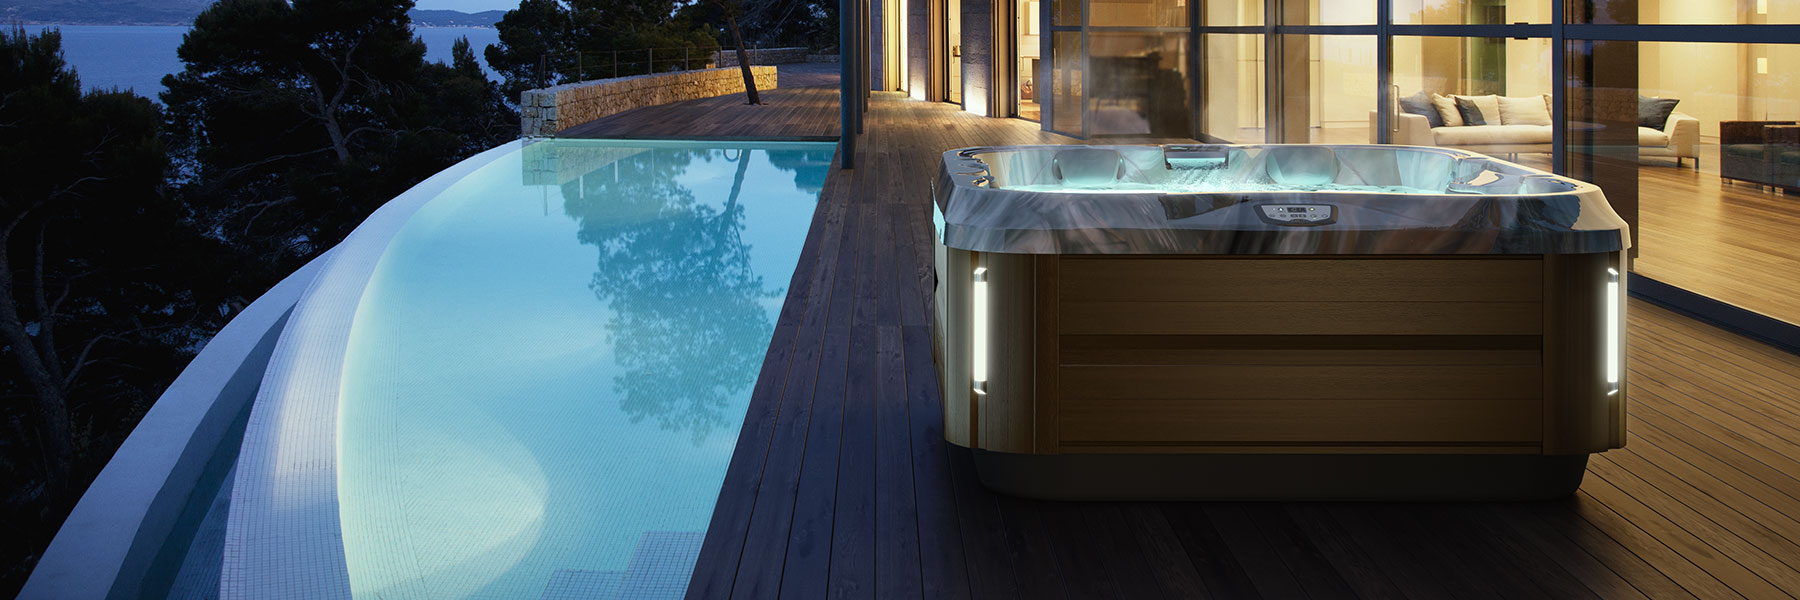 8 Health Benefits of Hot Tubs You’ll Love